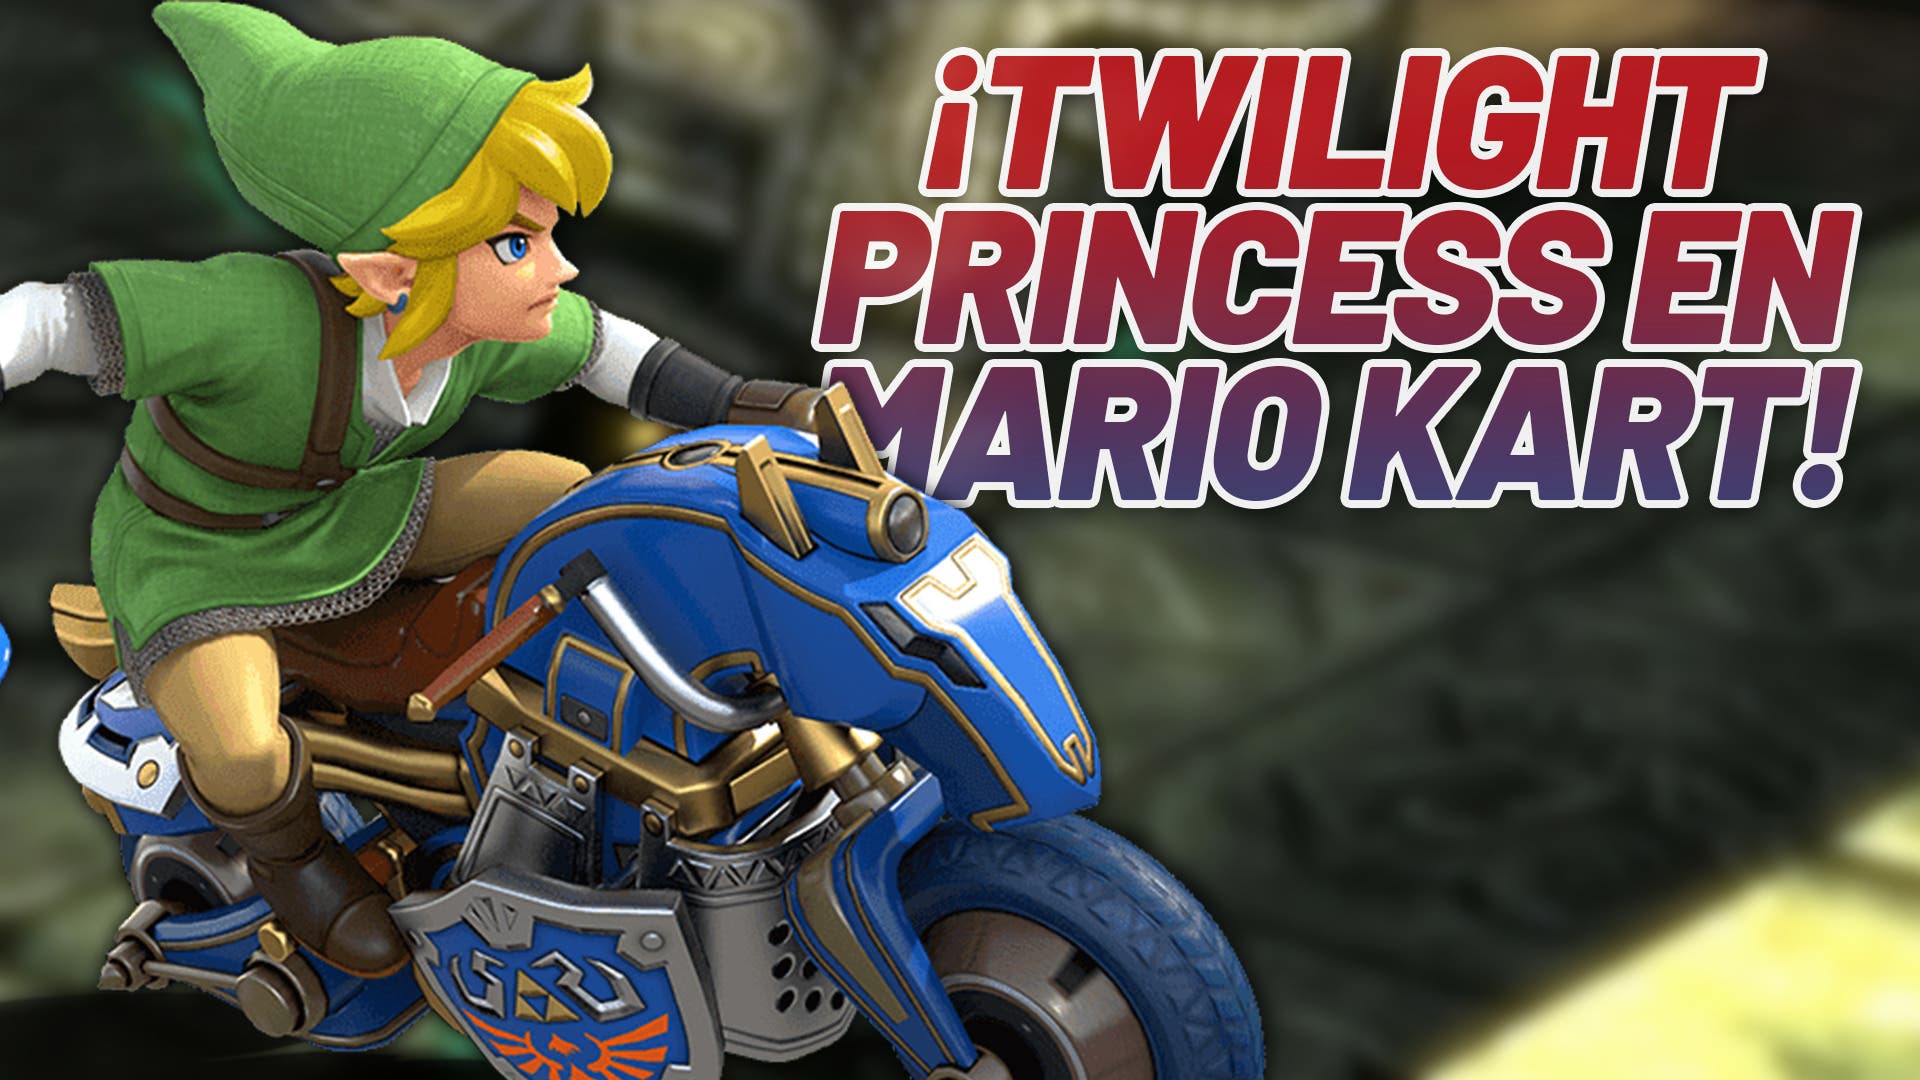 Get swept away by this amazing fan-made Mario Kart 8 track inspired by Zelda: Twilight Princess